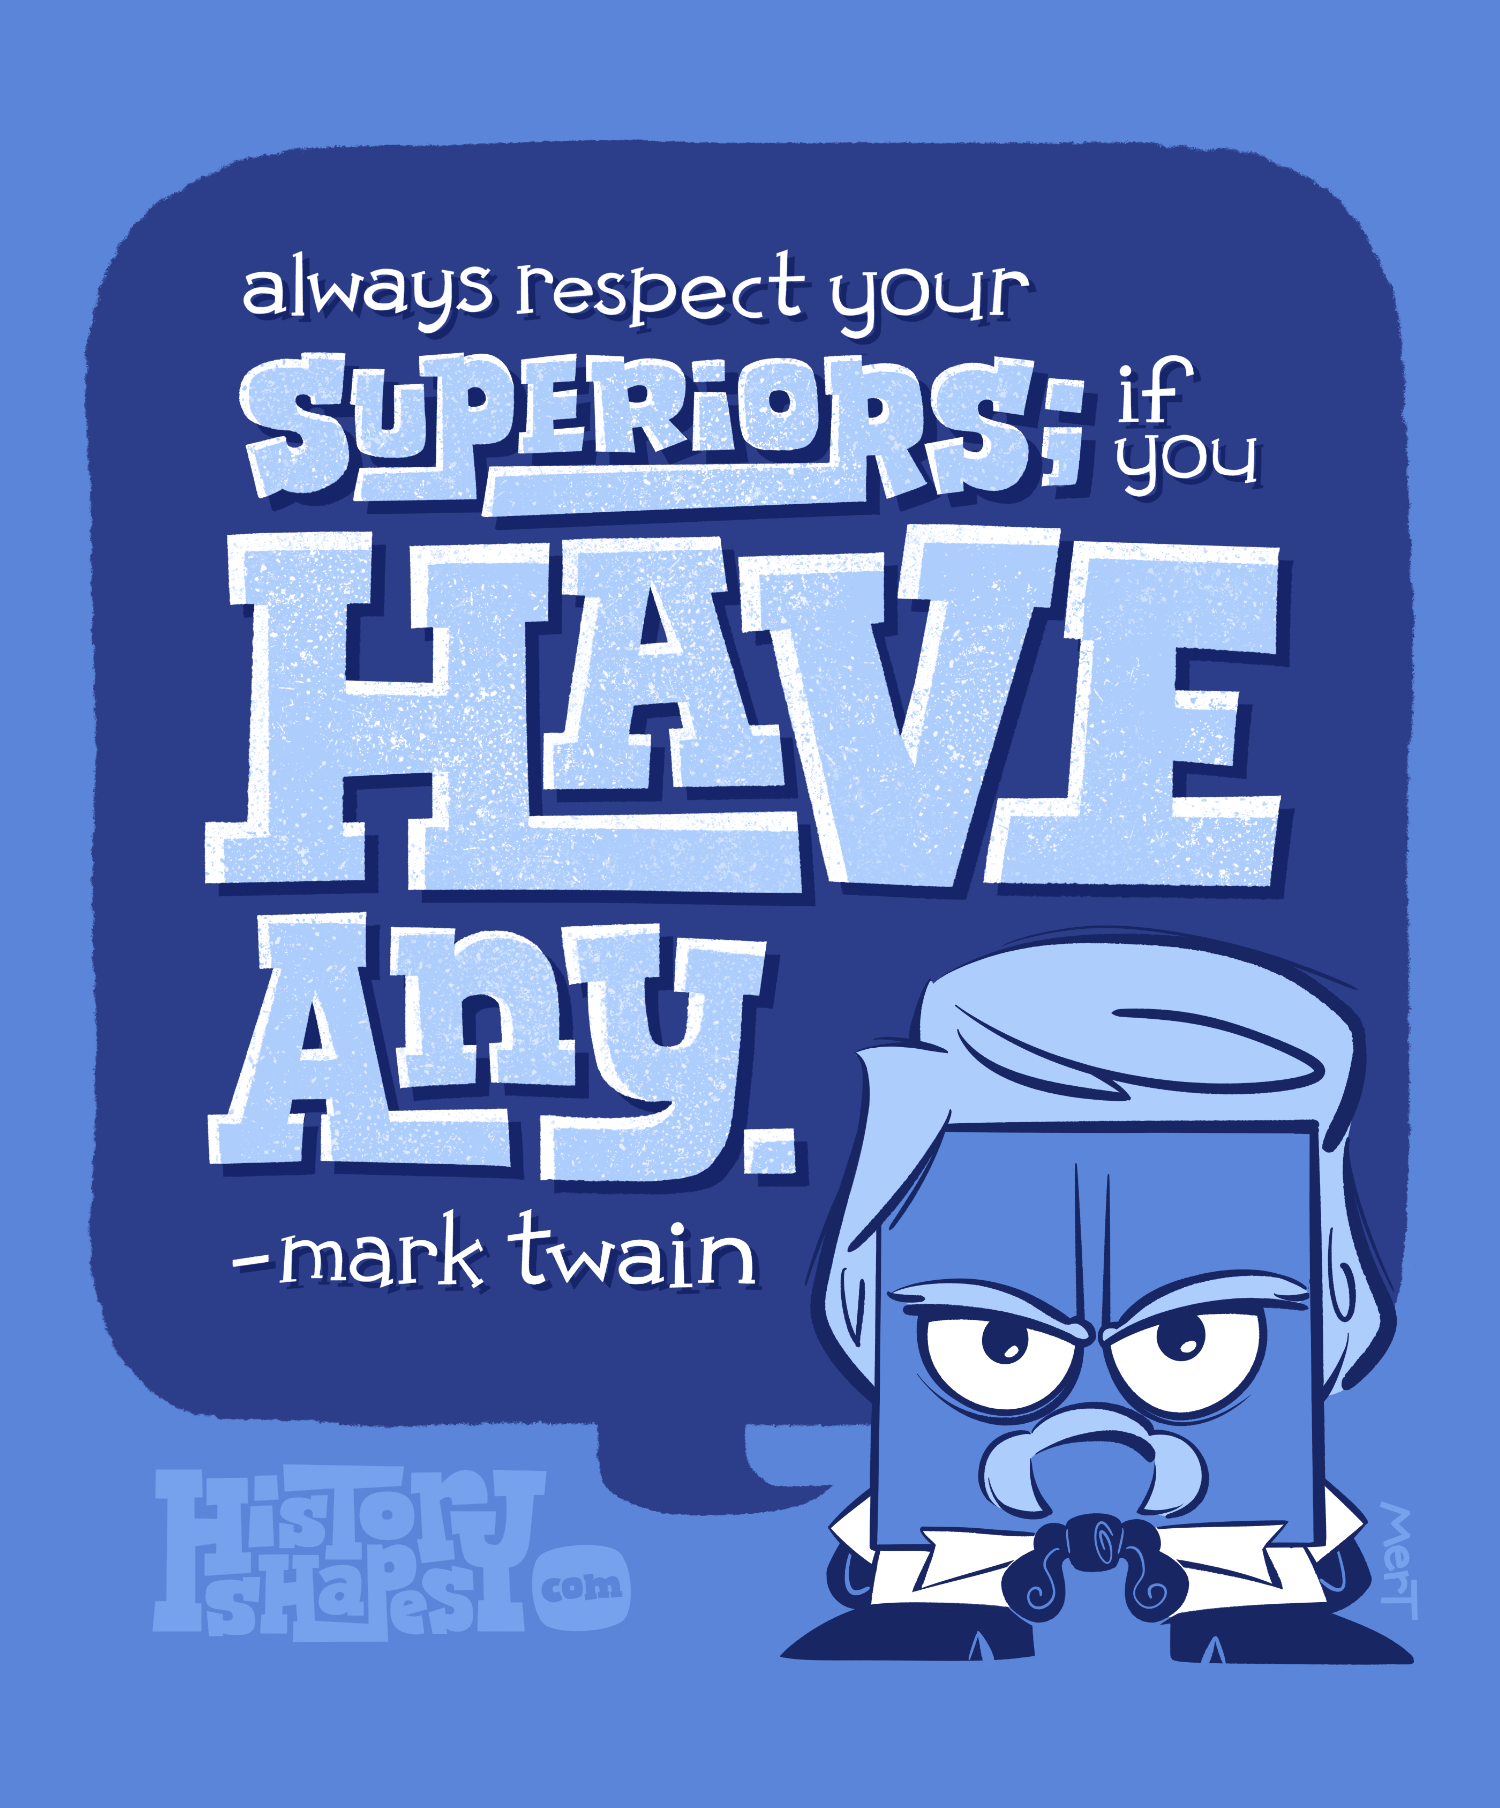 Ray, a grumpy blue square, is dressed as Mark Twain with the quote "Always respect your superiors; if you have any."